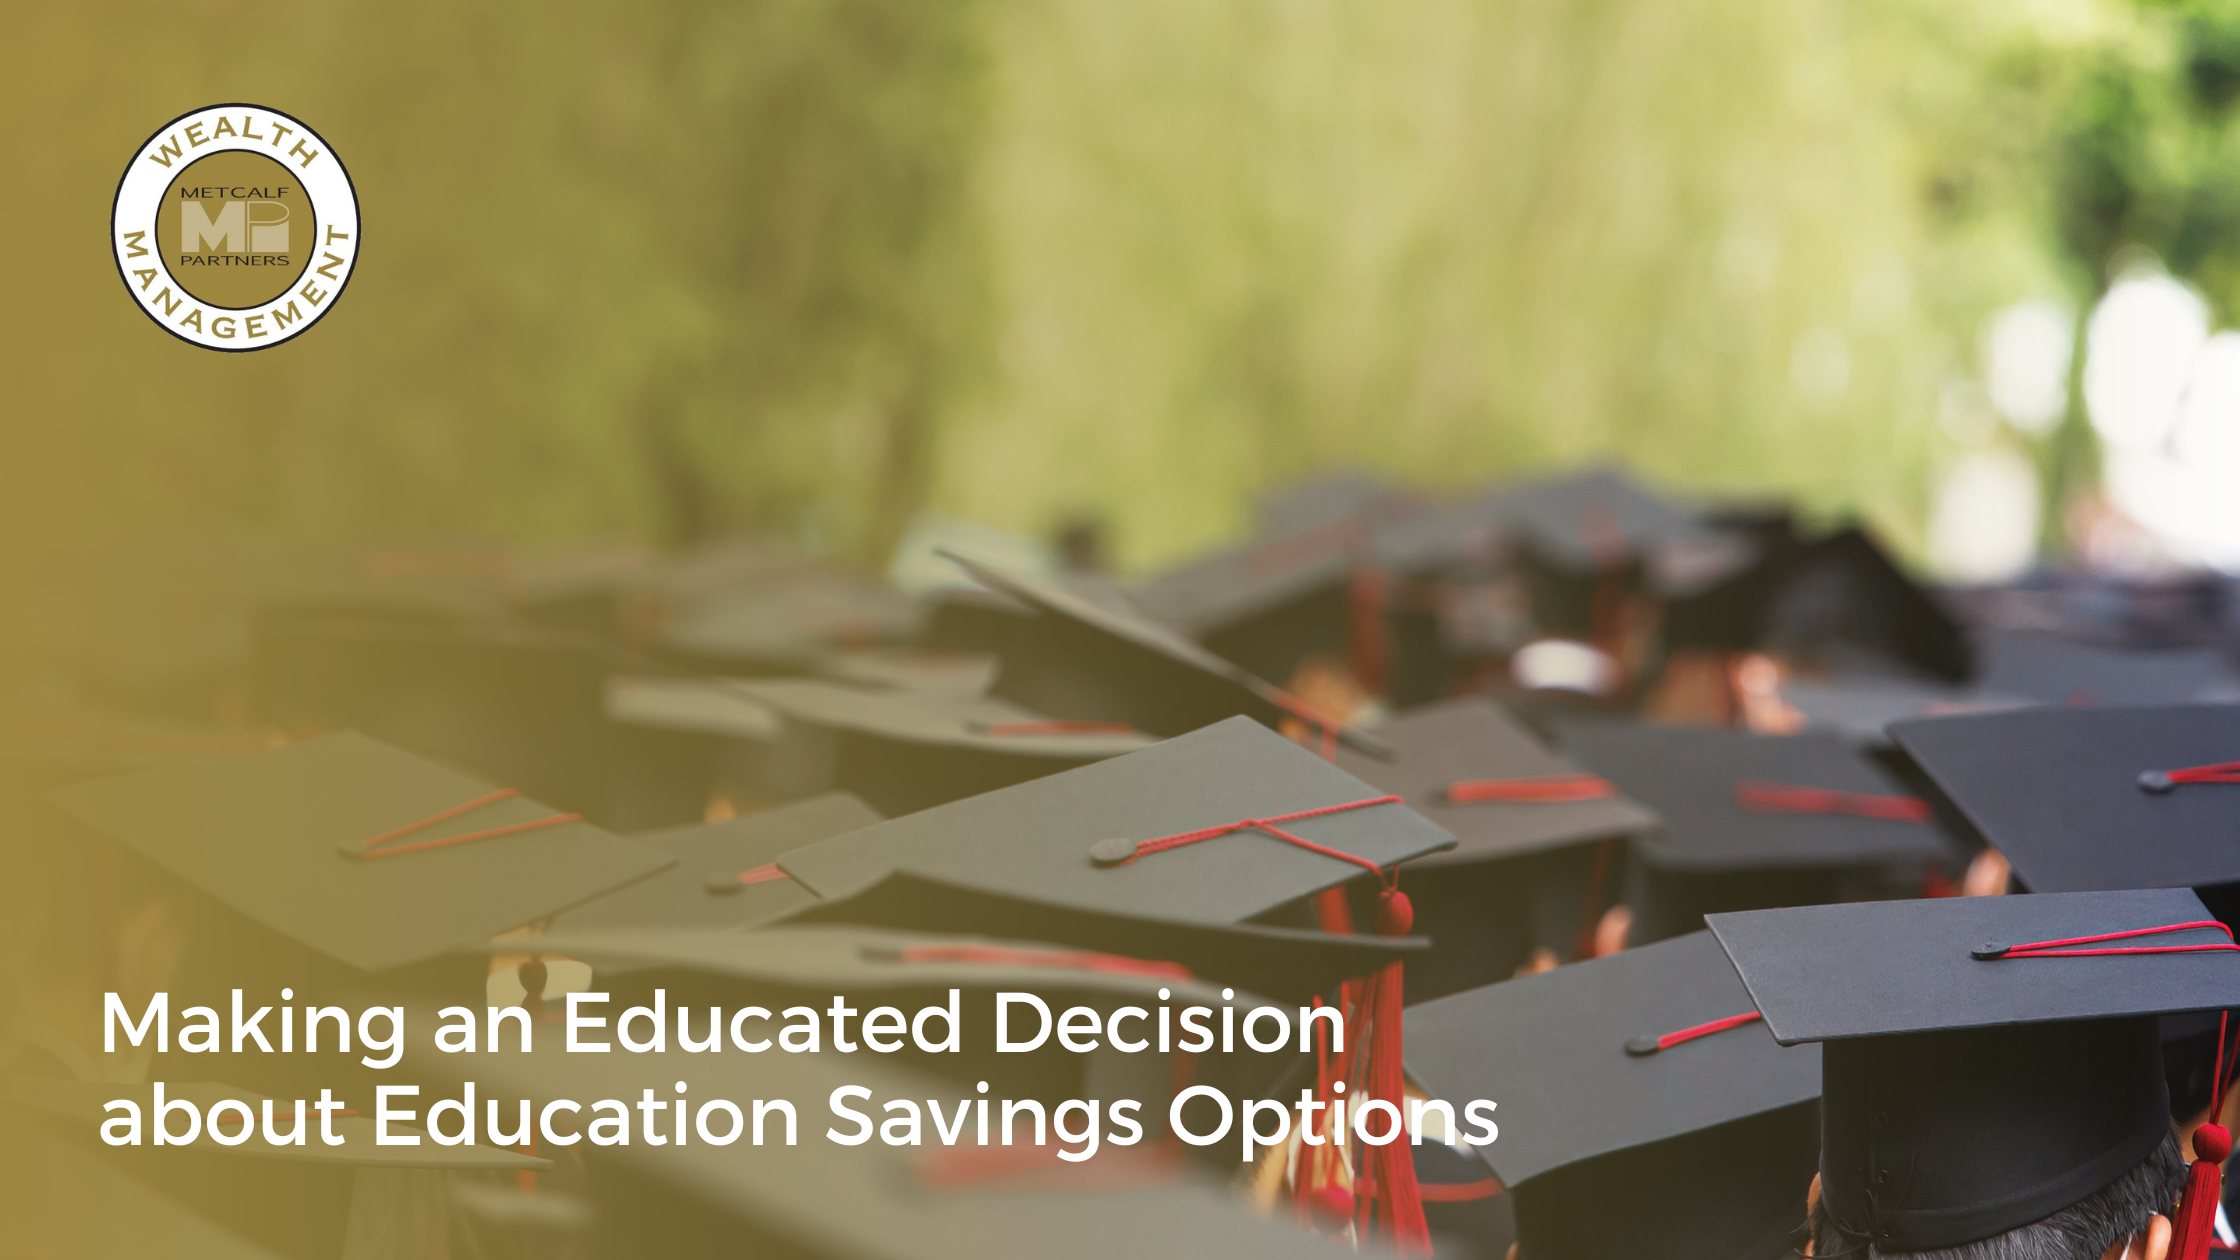 Featured image for “Making an Educated Decision about Education Savings Options”